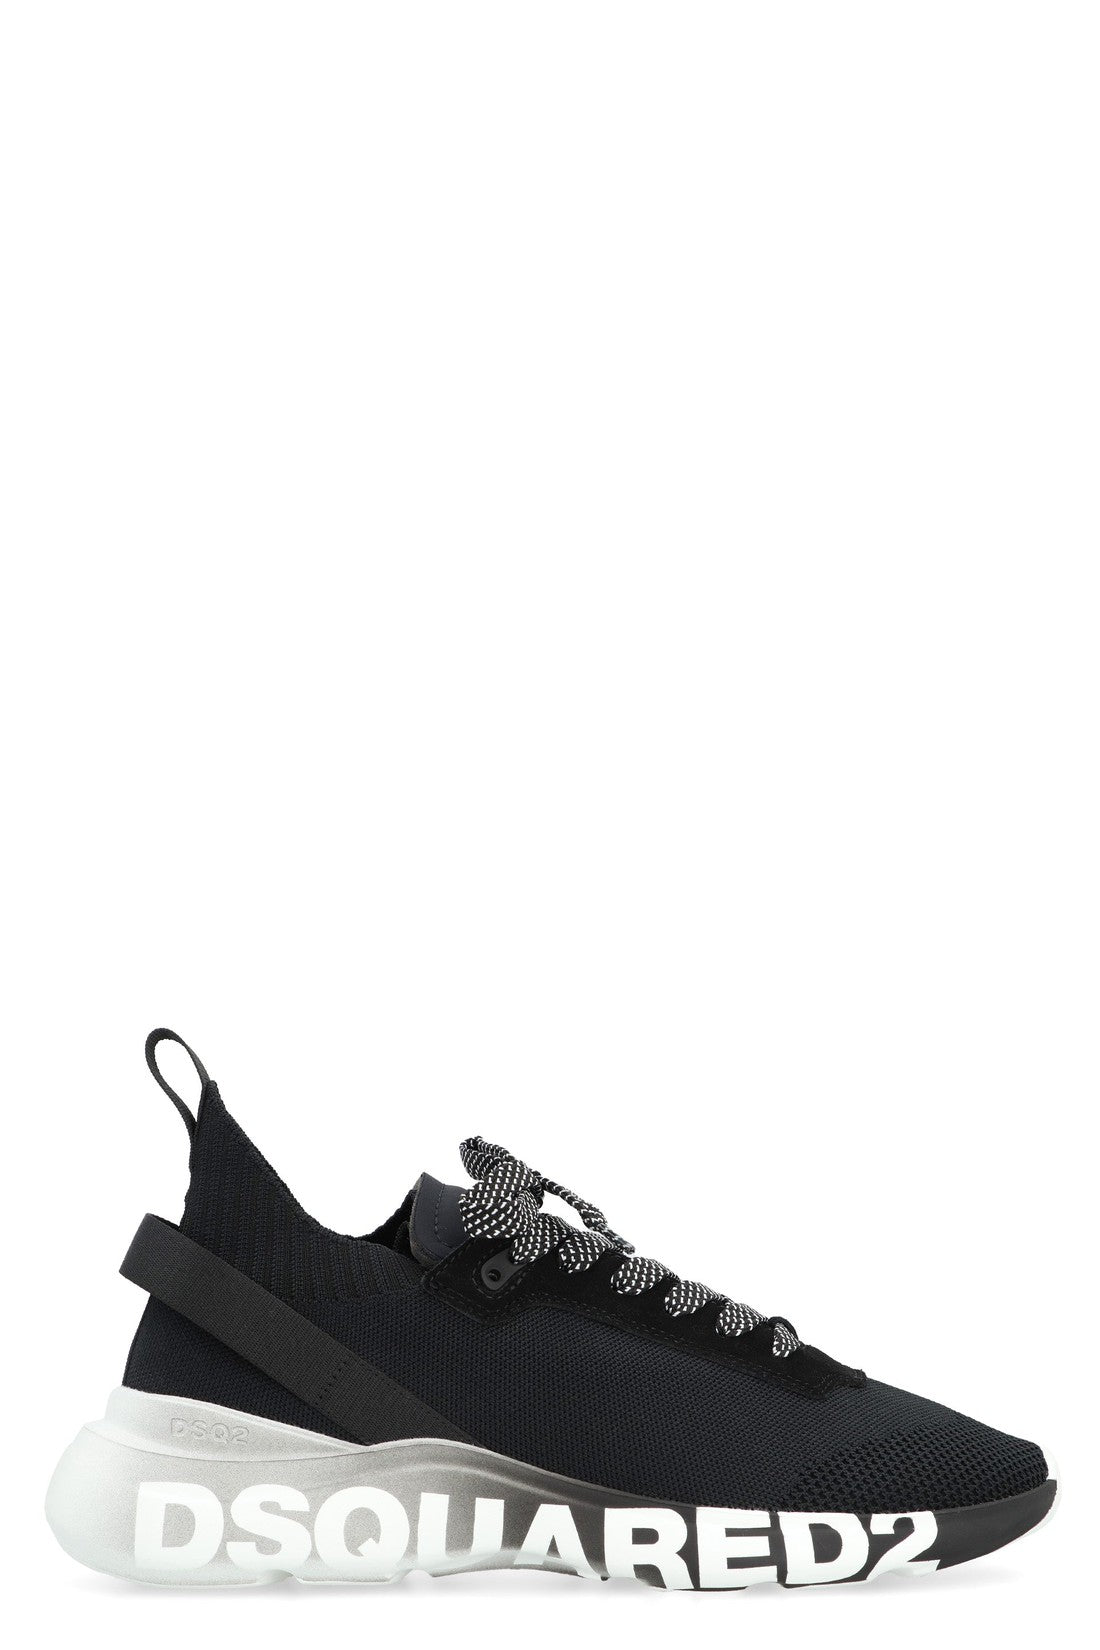 Dsquared2-OUTLET-SALE-Fly low-top sneakers-ARCHIVIST